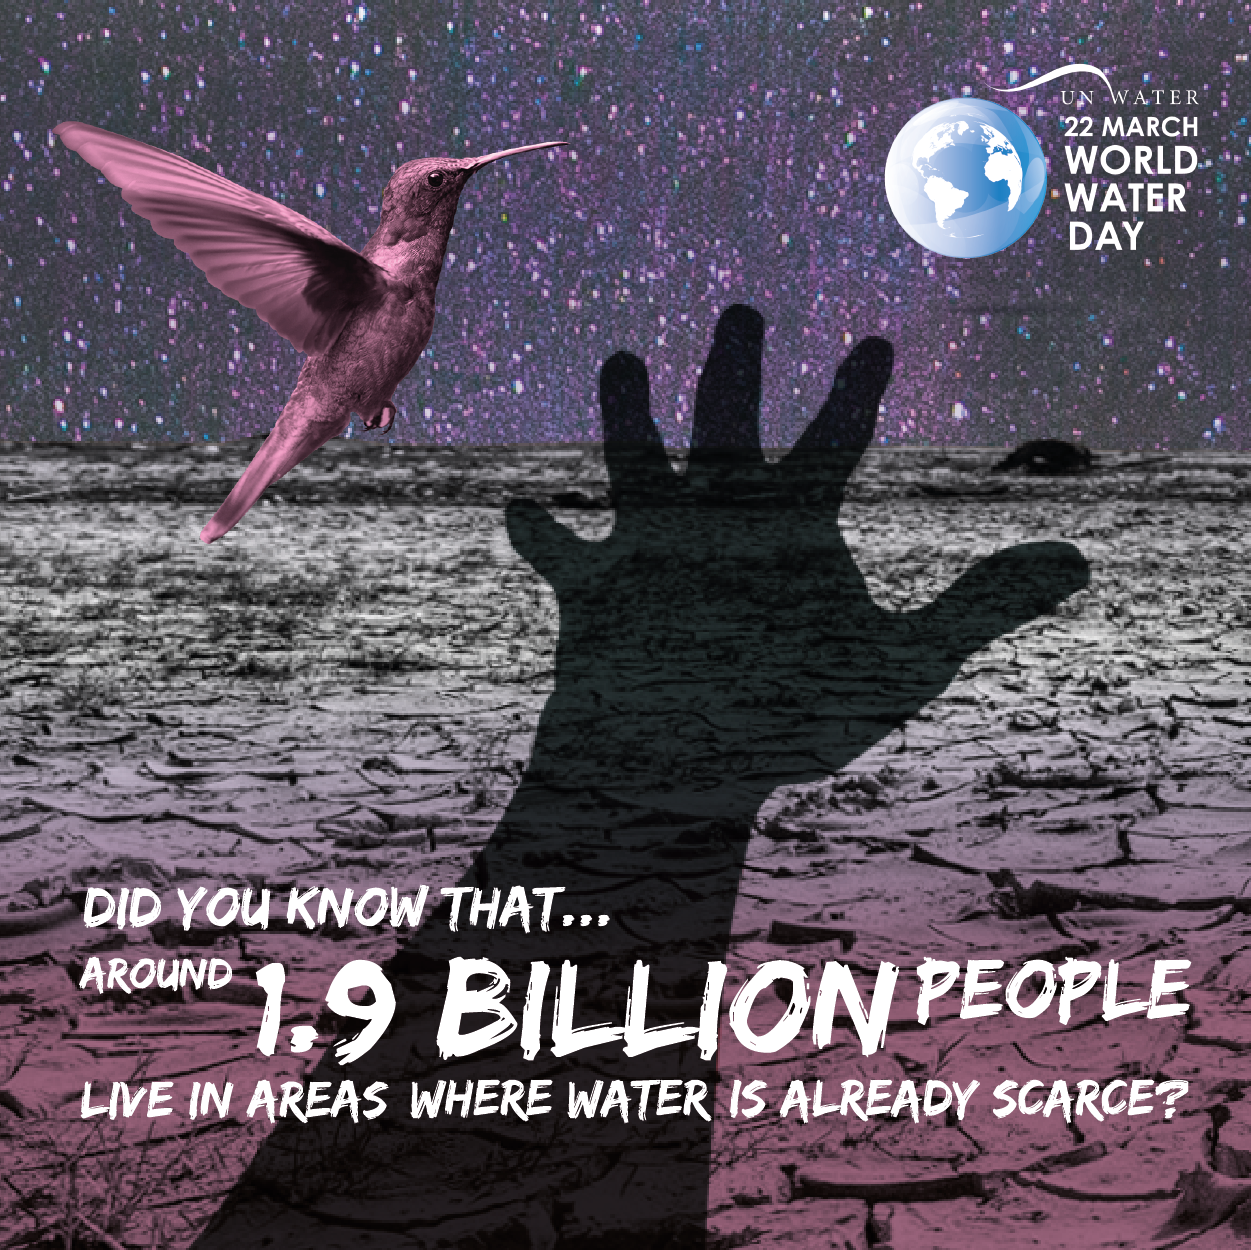 Did you know that around 1.9 billion people live in areas where water is already scarce? 